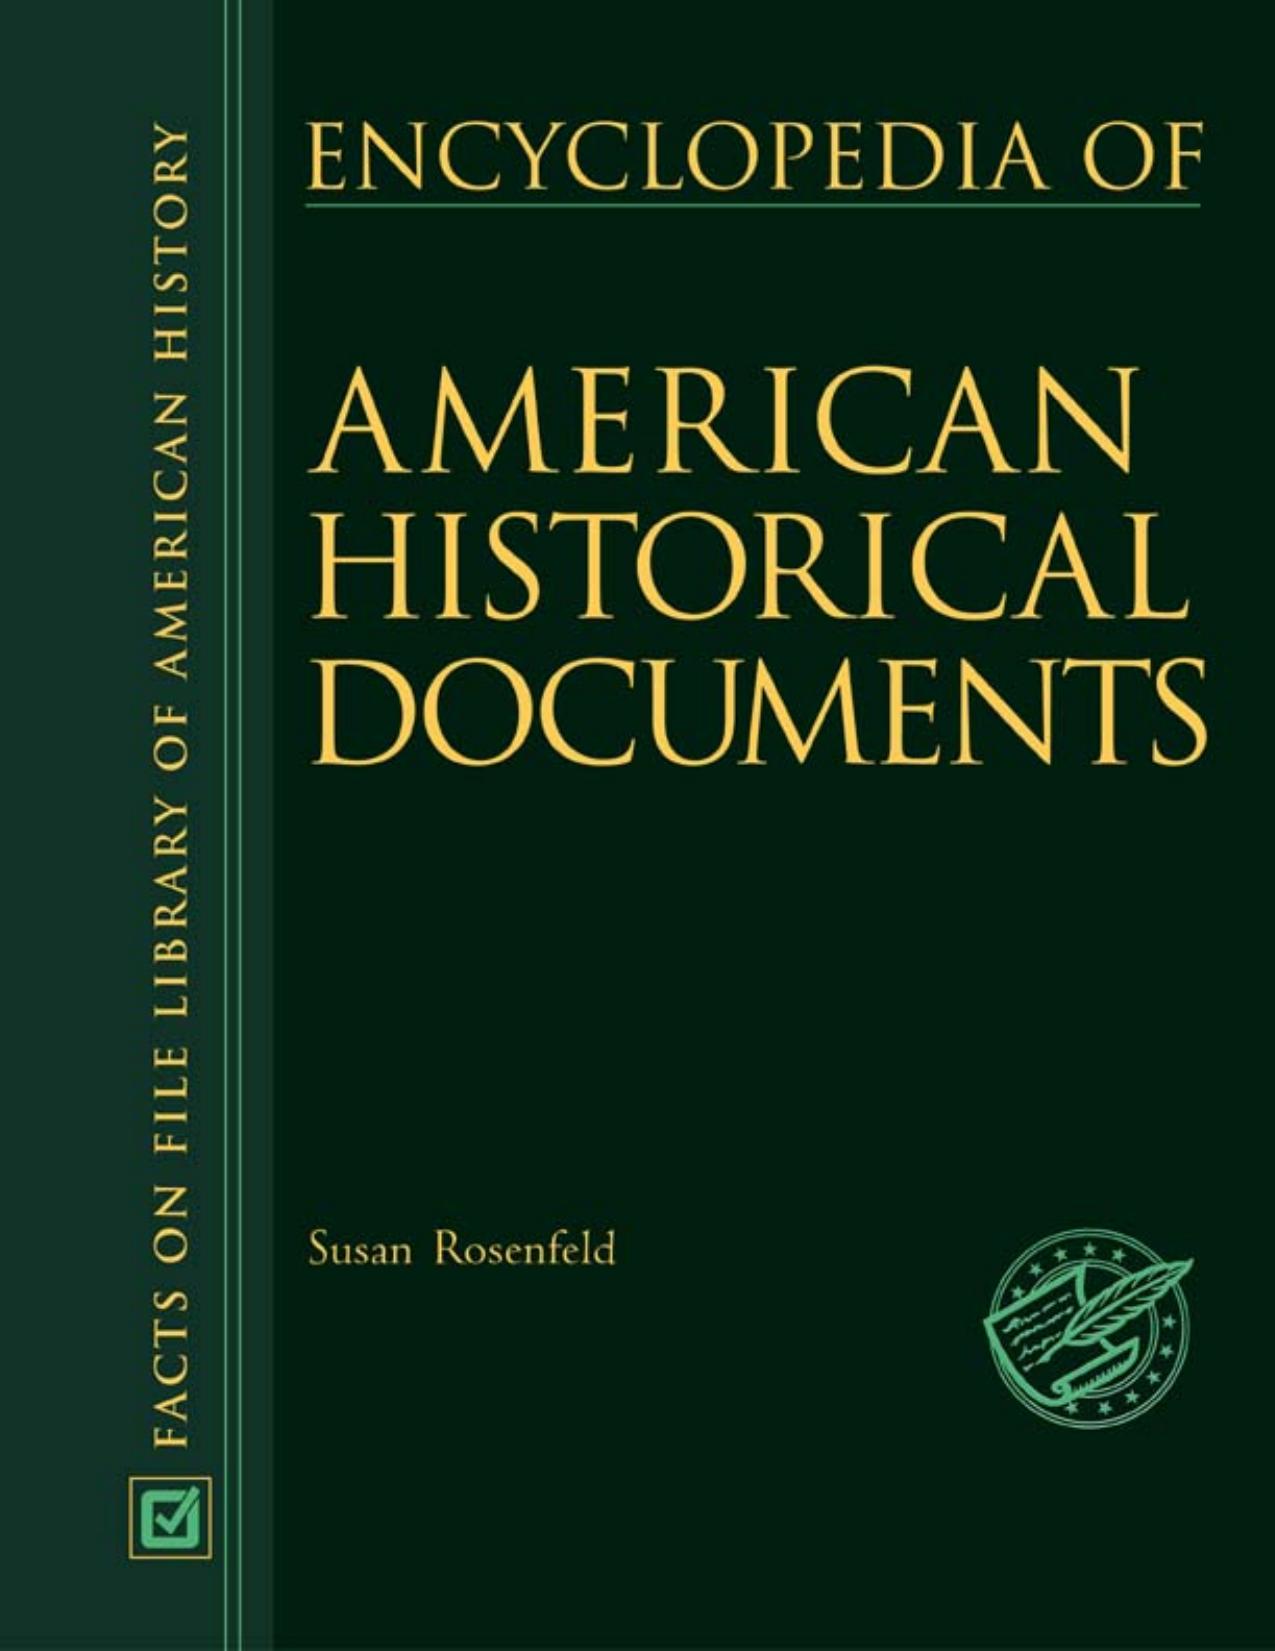 Encyclopedia of American Historical Documents